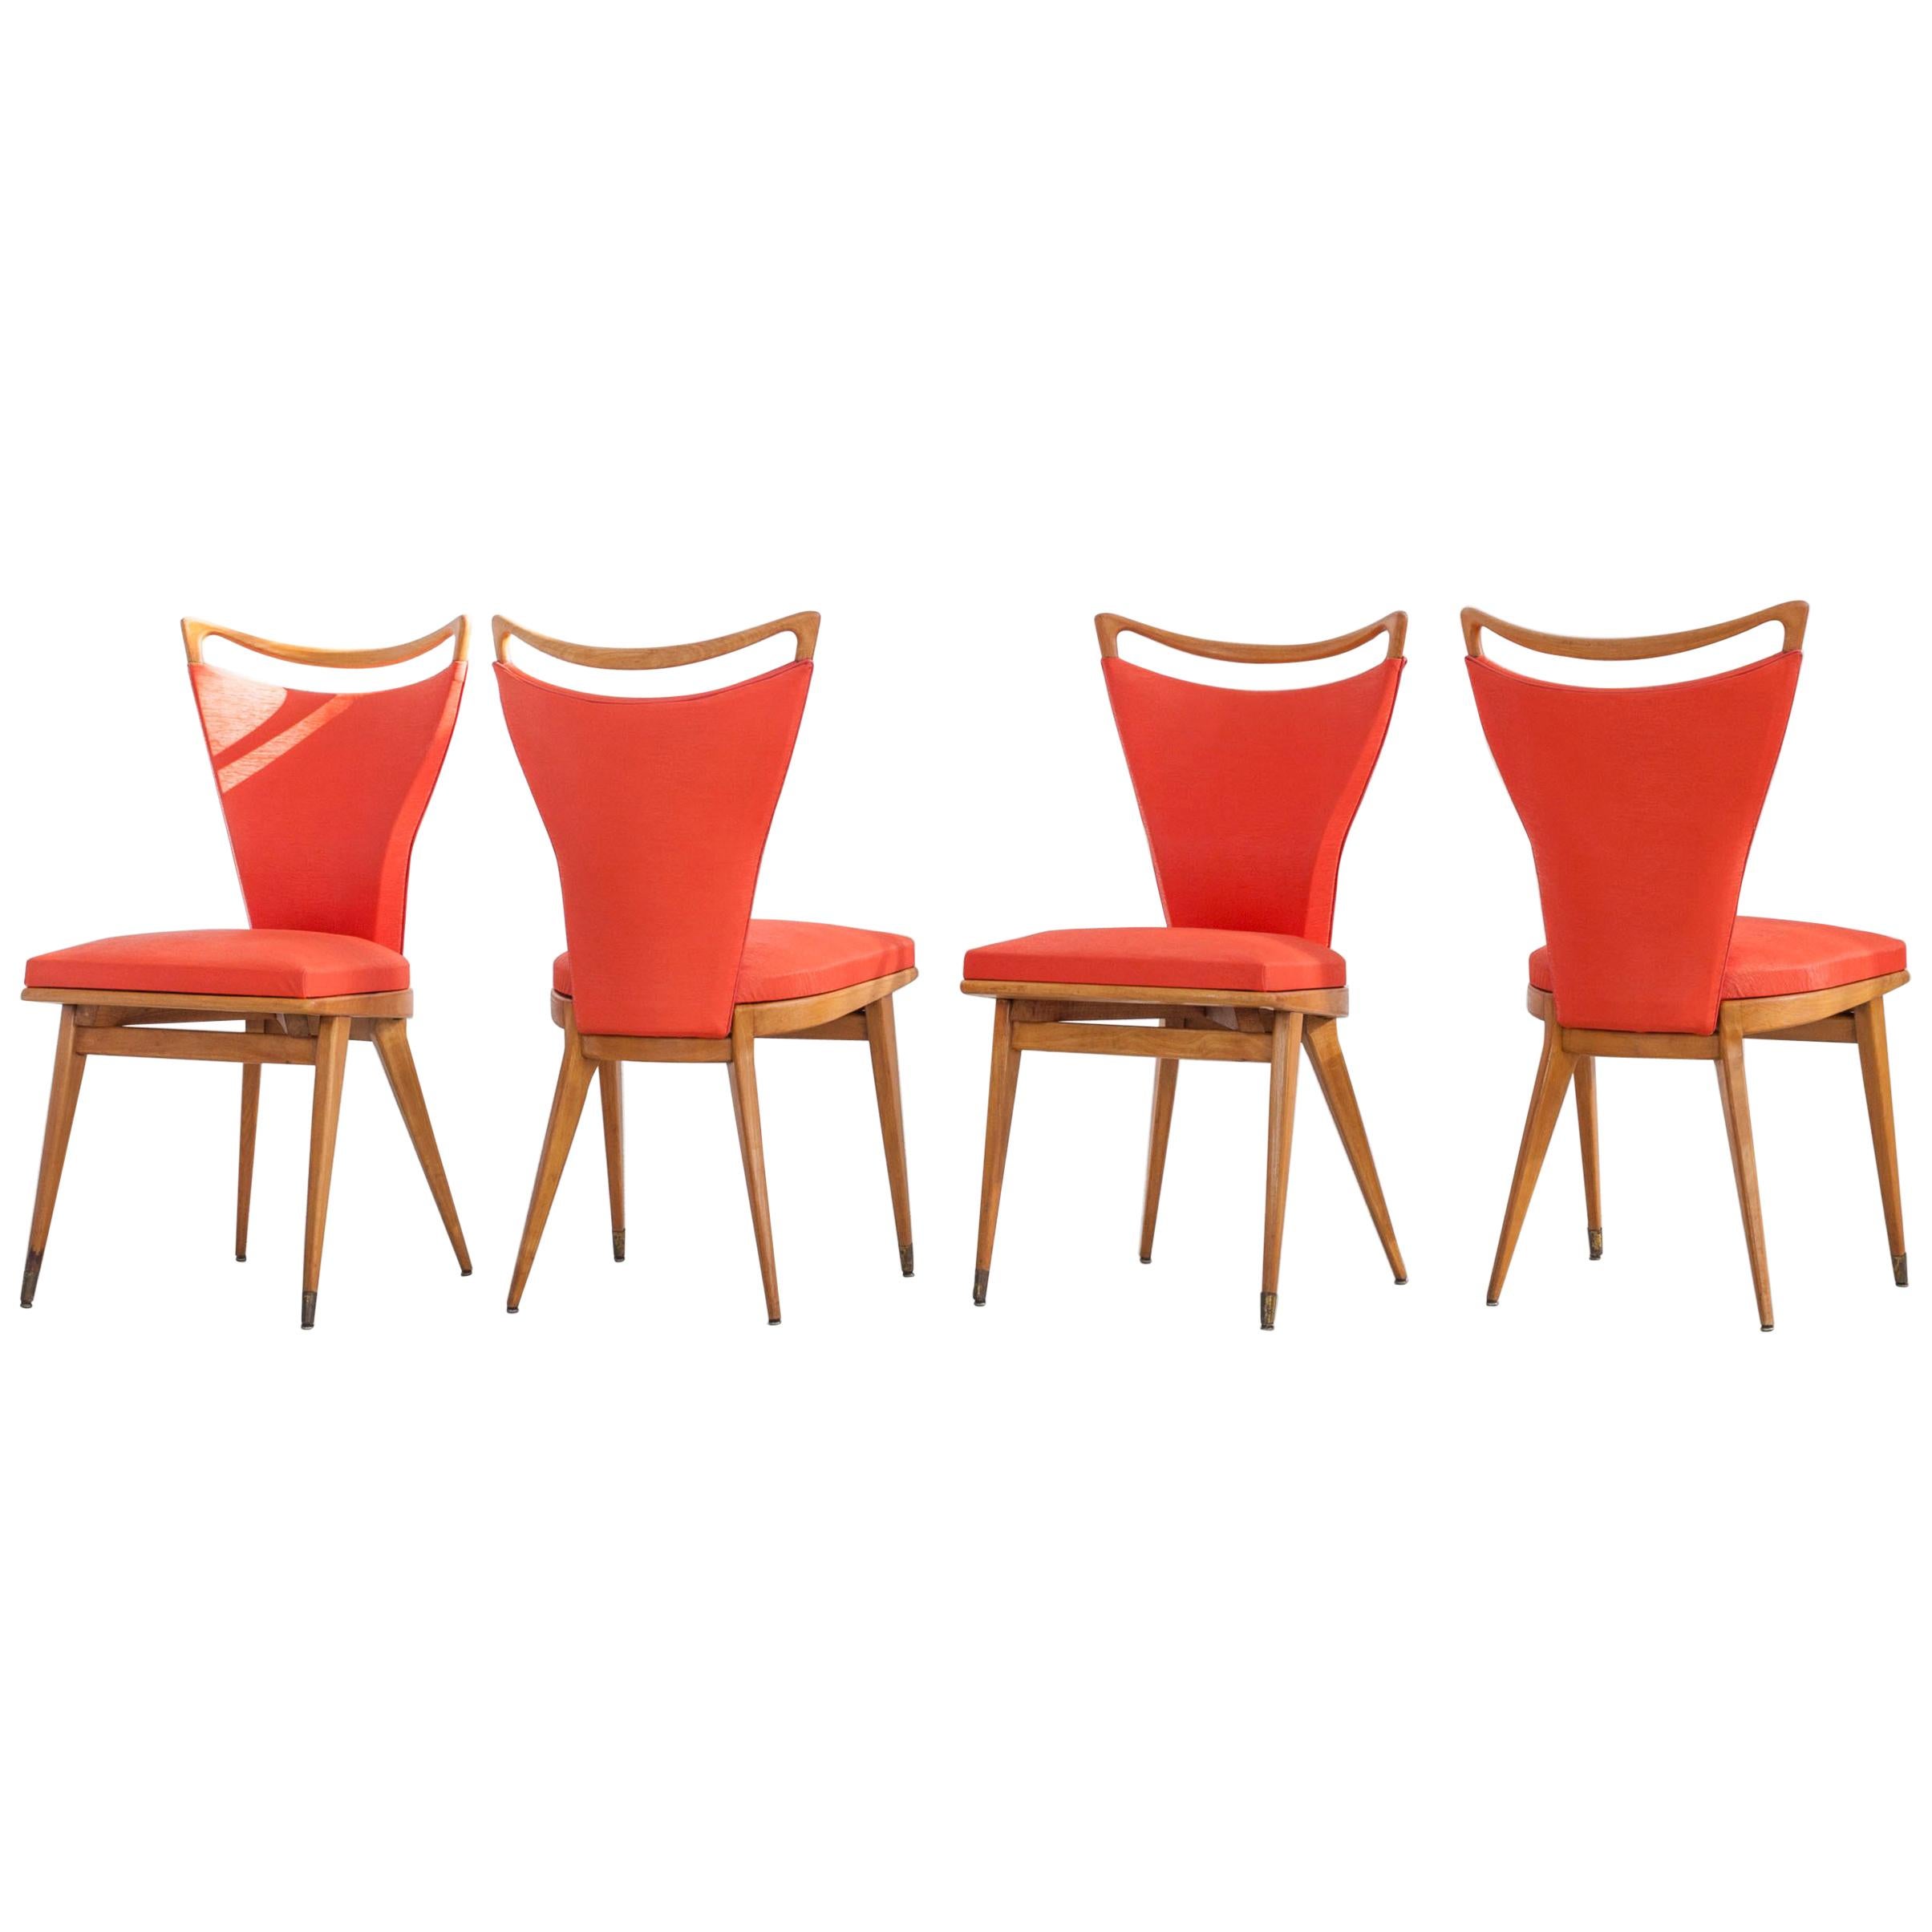 Set of 4 French Wooden Chairs with Red Faux Leather Cover, 1950s